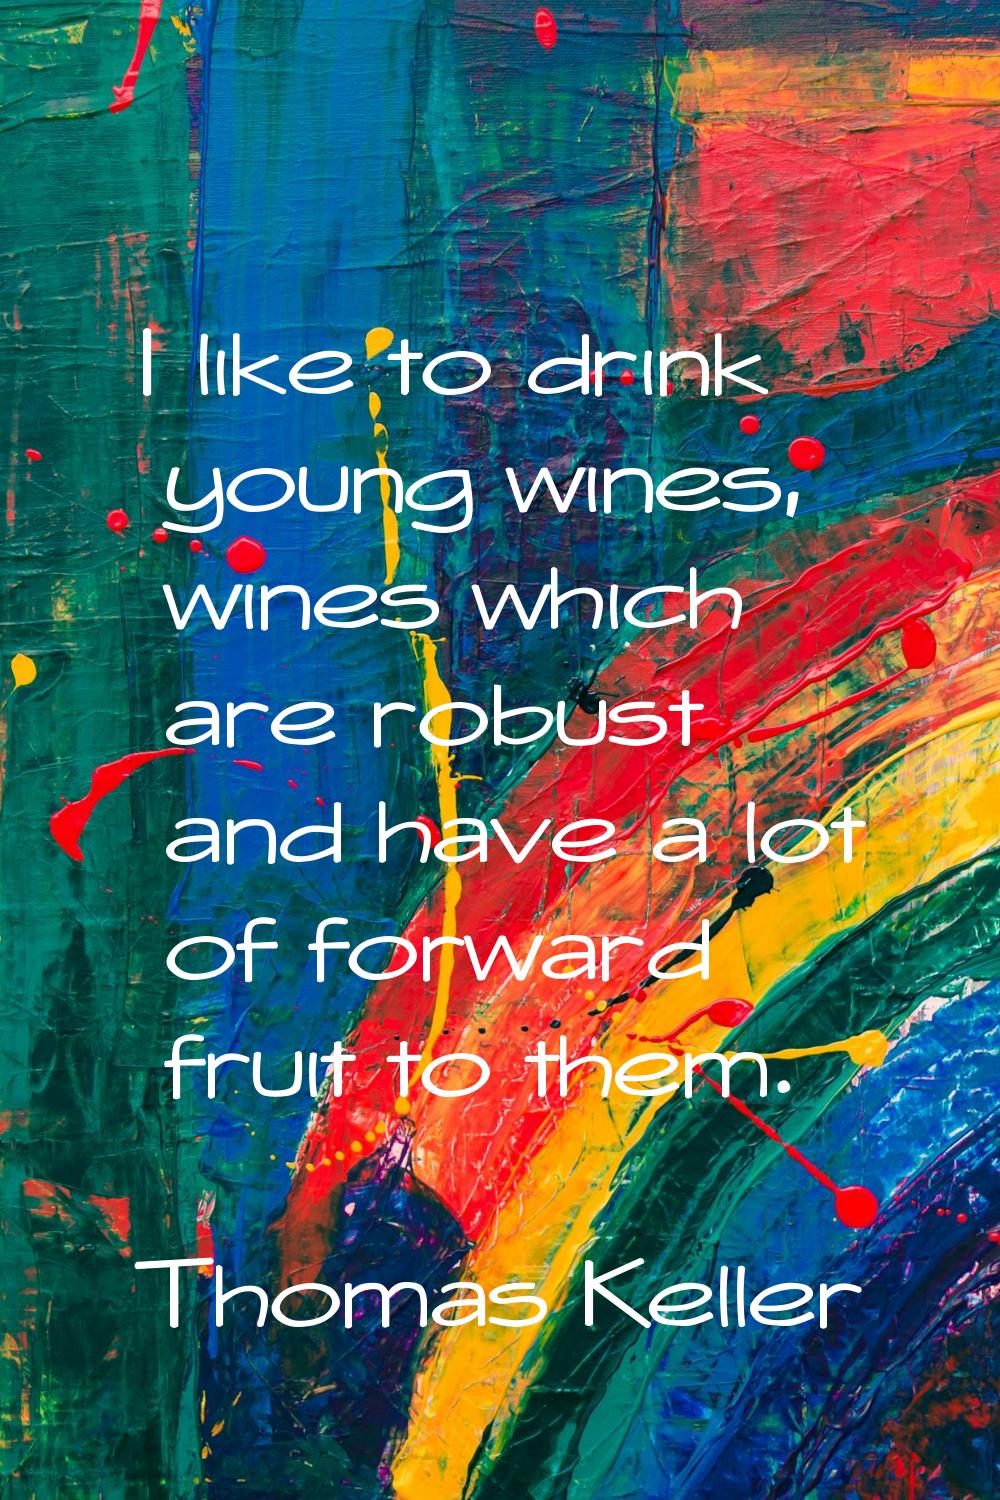 I like to drink young wines, wines which are robust and have a lot of forward fruit to them.